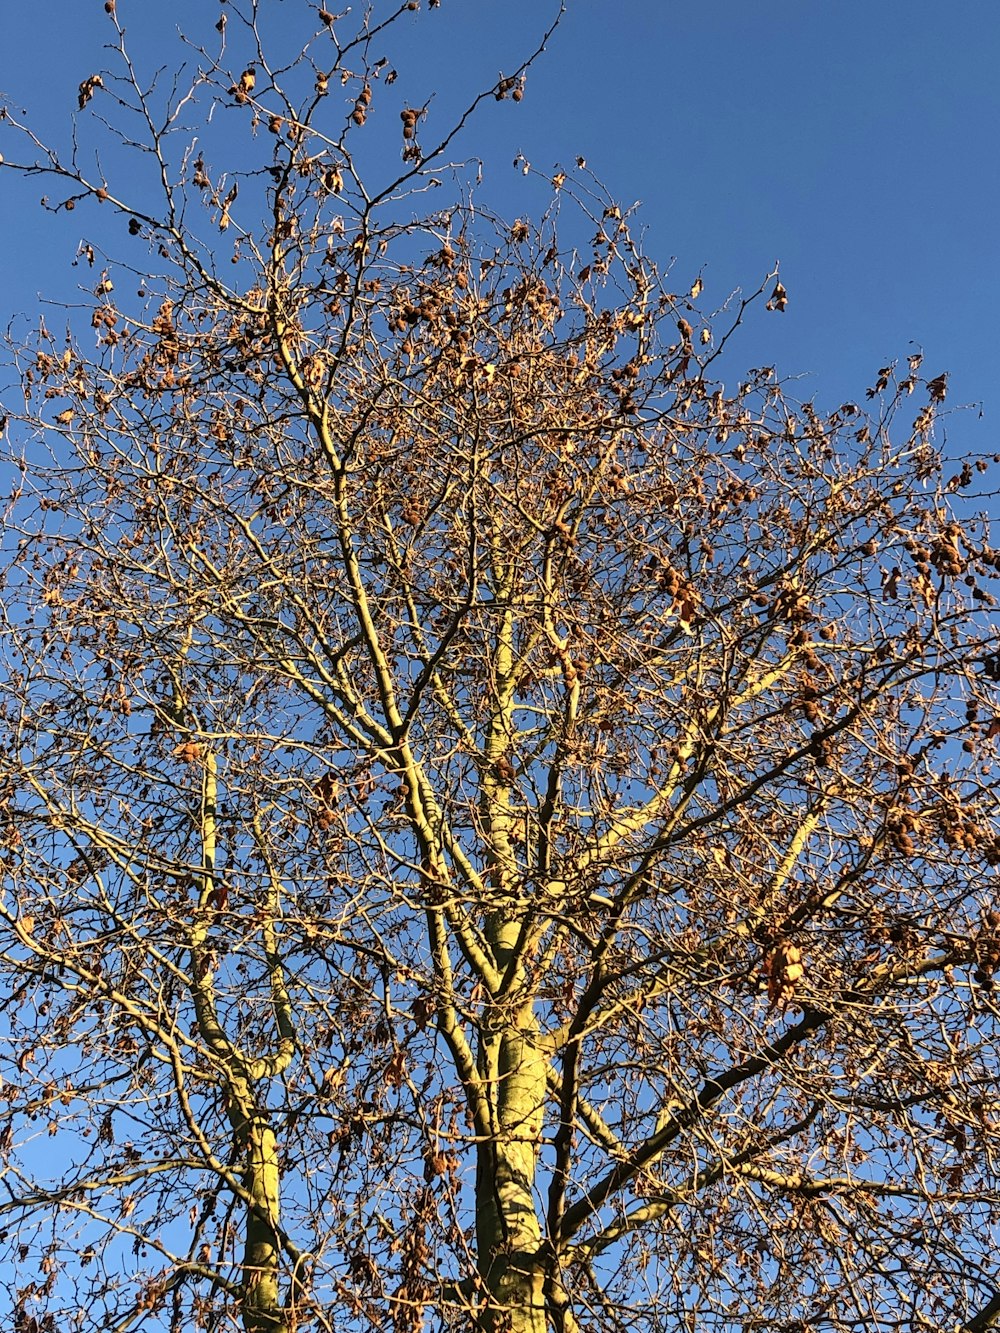 a tall tree with lots of leaves on it